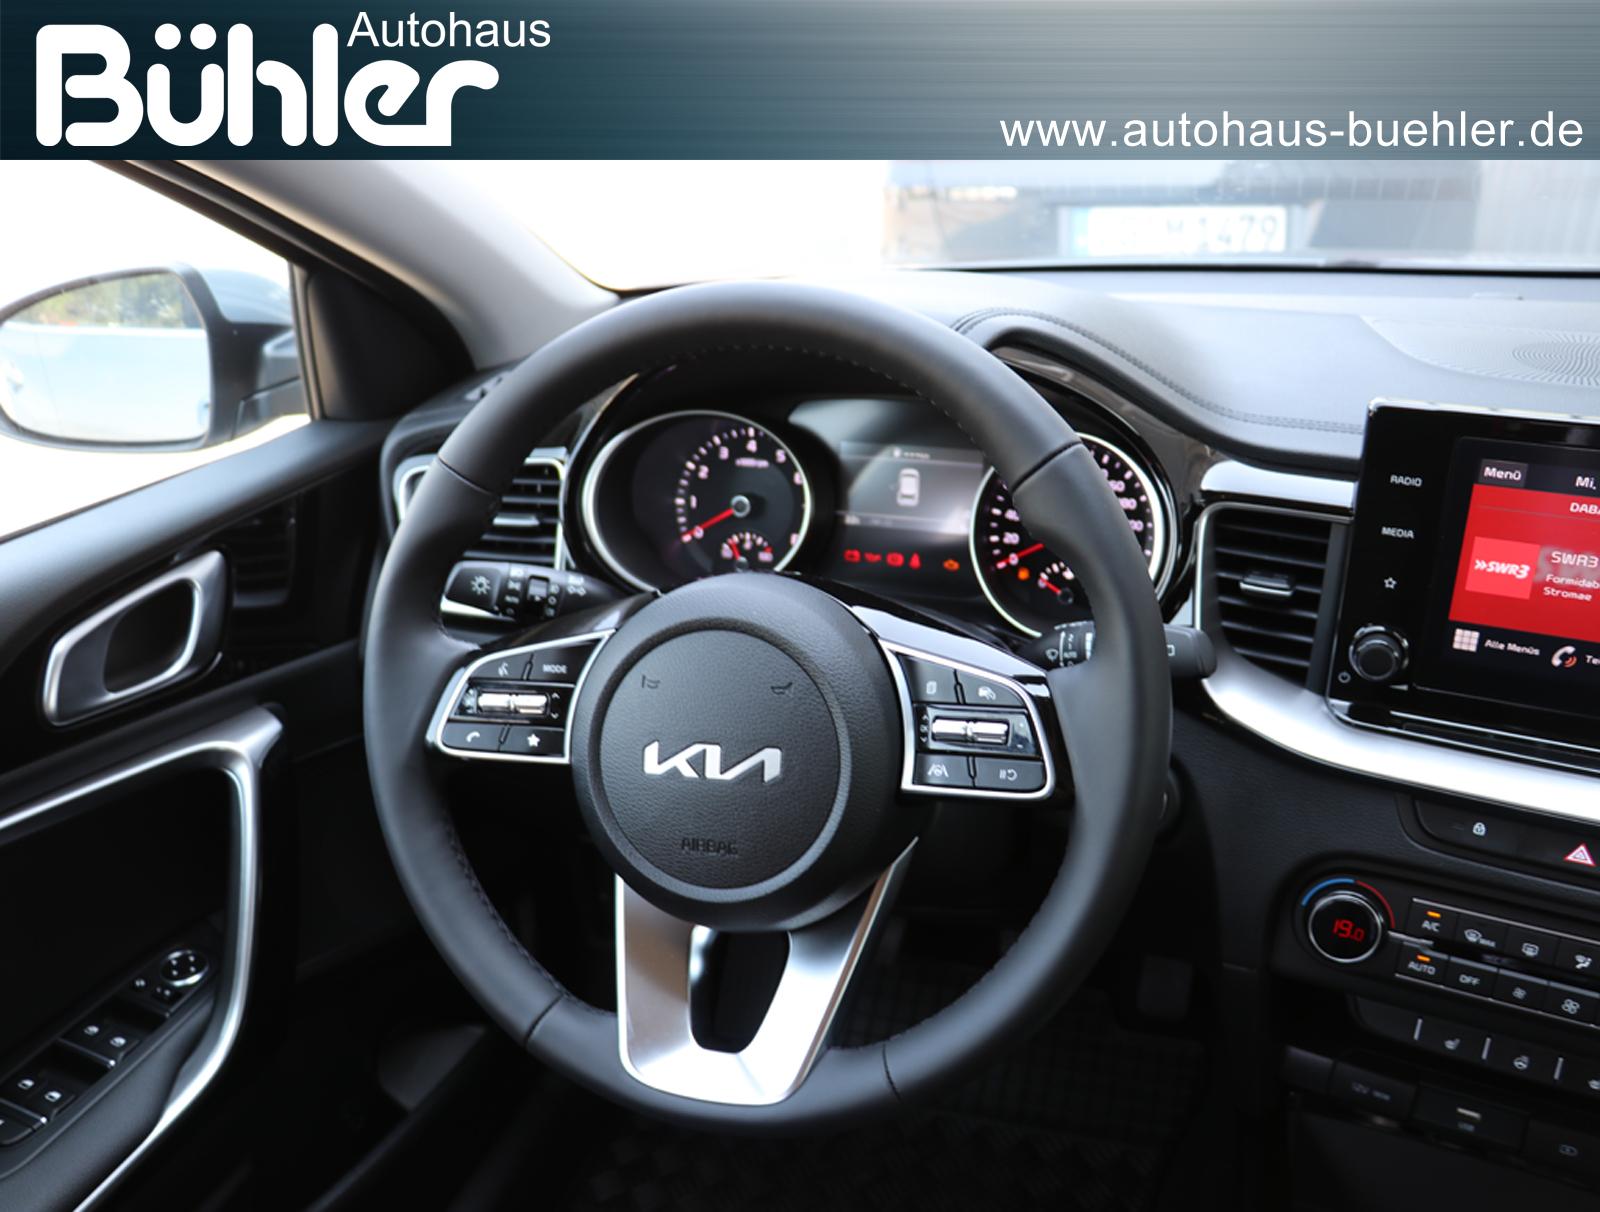 Ceed 1.5 T-GDI DCT Automati Vision LED - Interieur